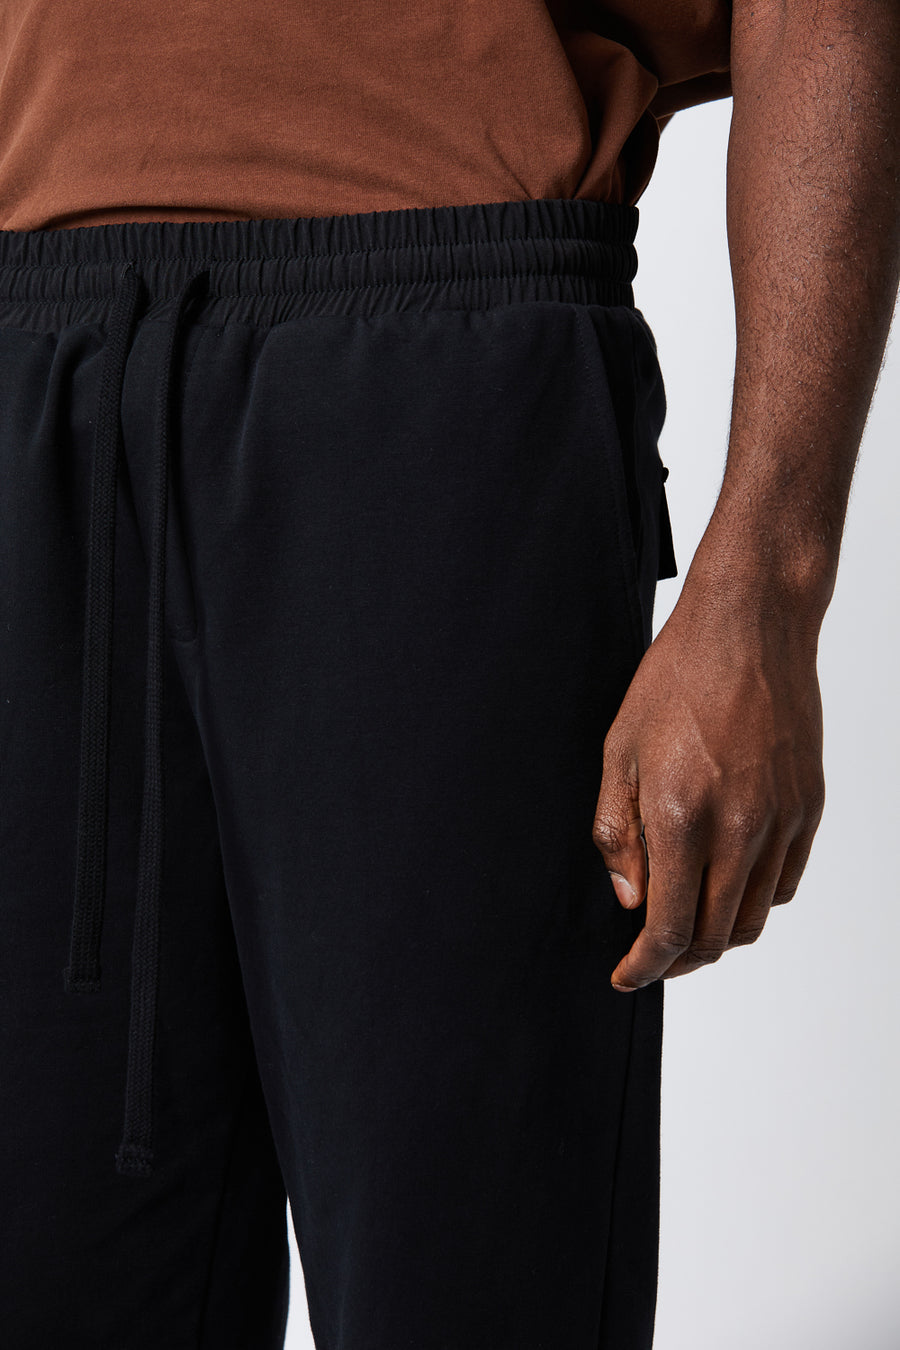 Buy the Thom Krom M ST 348 Sweatpants in Black at Intro. Spend £50 for free UK delivery. Official stockists. We ship worldwide.